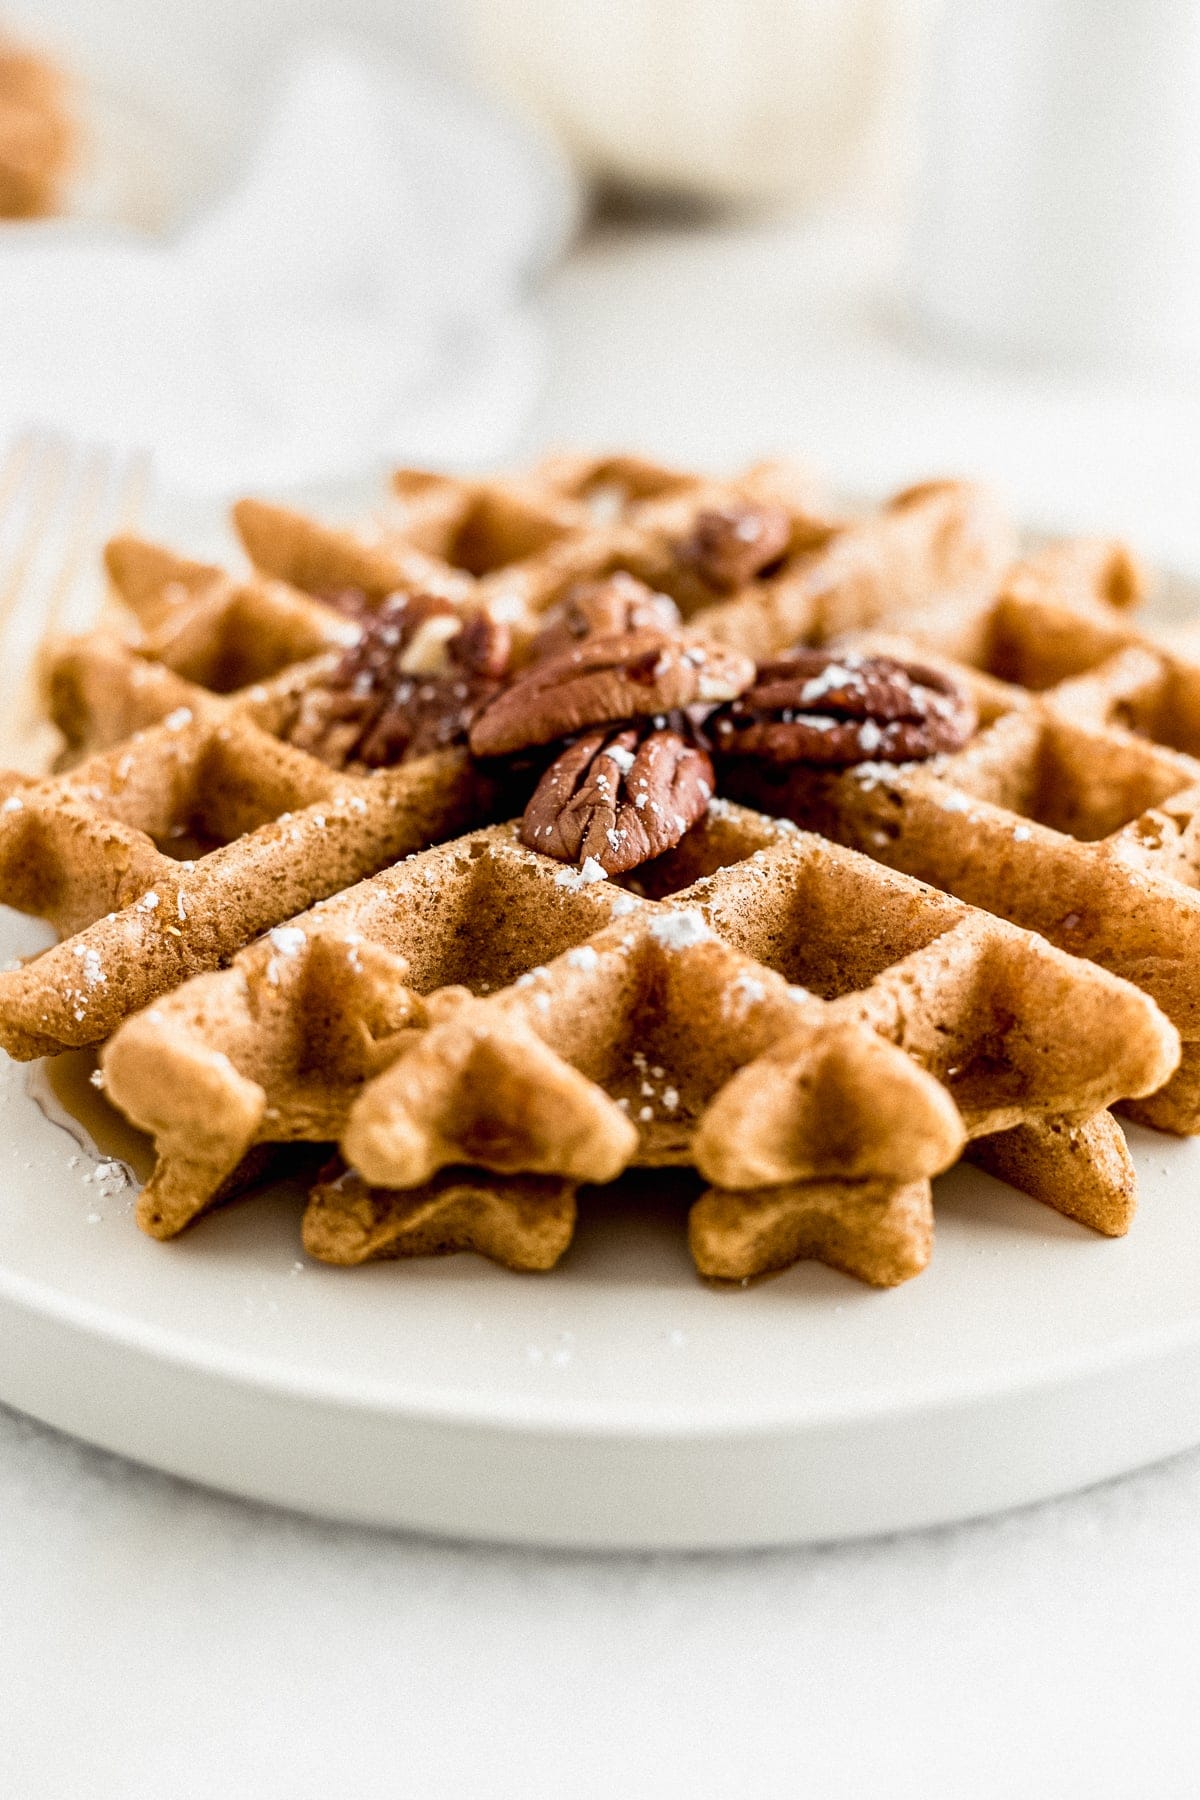 Healthy whole wheat pumpkin waffles with crispy outsides and fluffy, spiced insides are the perfect fall breakfast to wake up to on weekends!  (dairy-free, vegetarian, no added sugar)